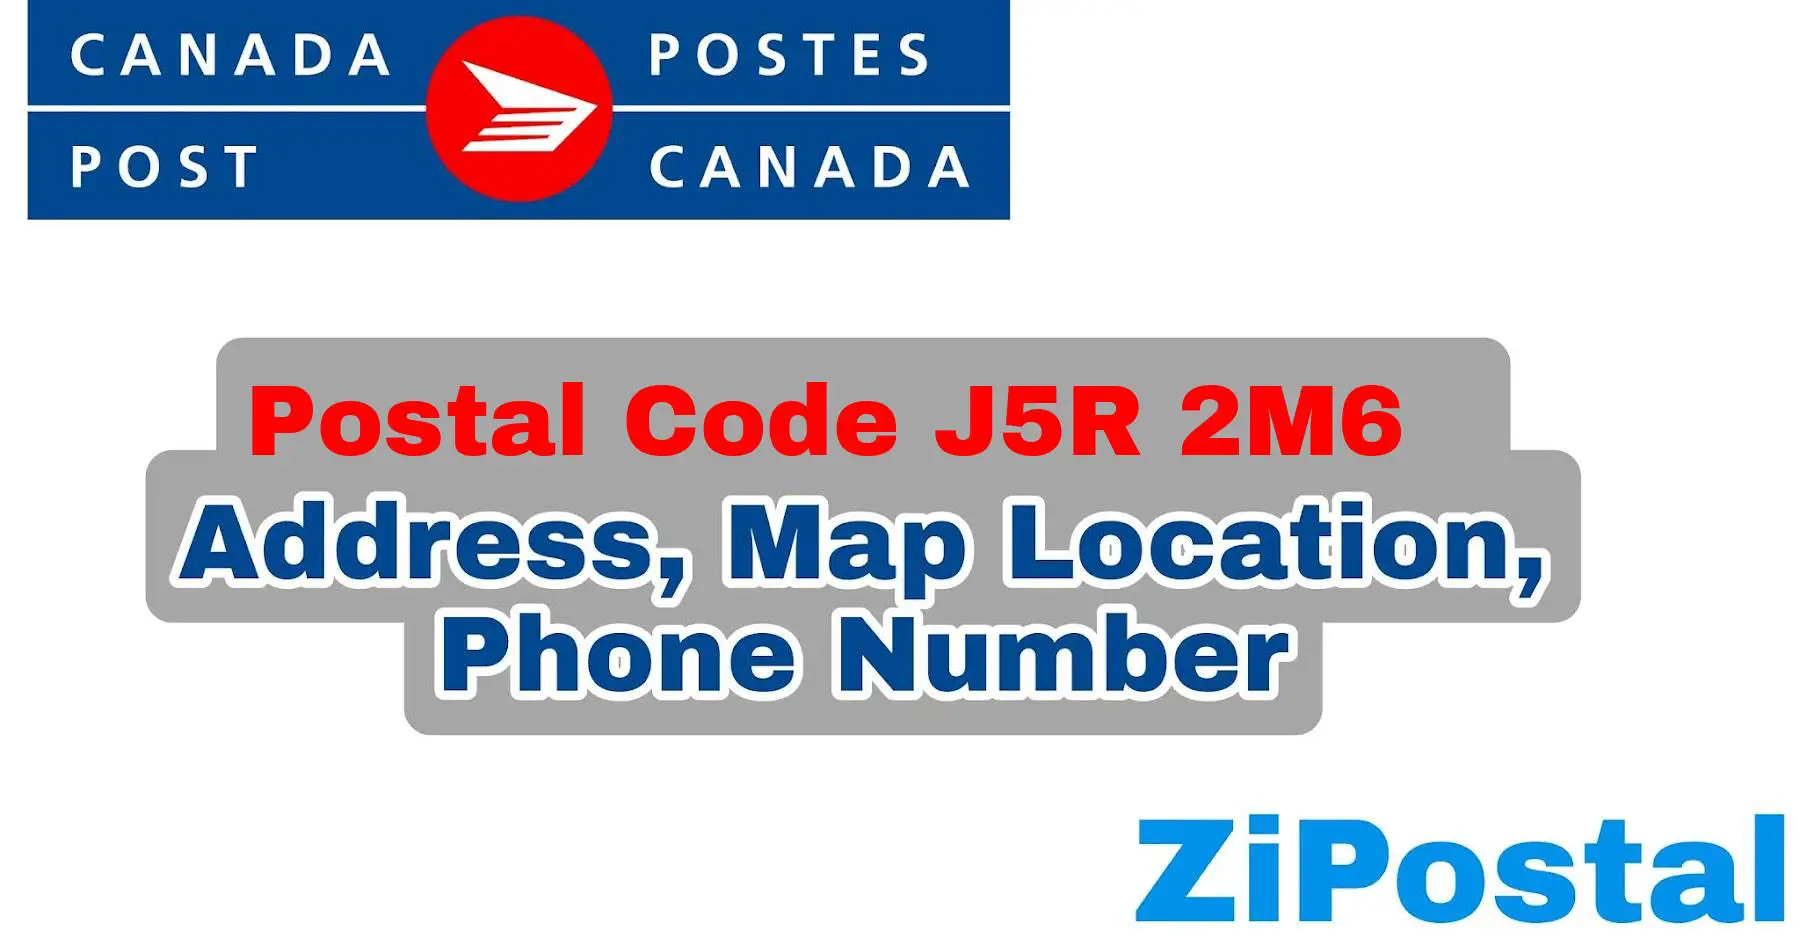 Postal Code J5R 2M6 Address Map Location and Phone Number